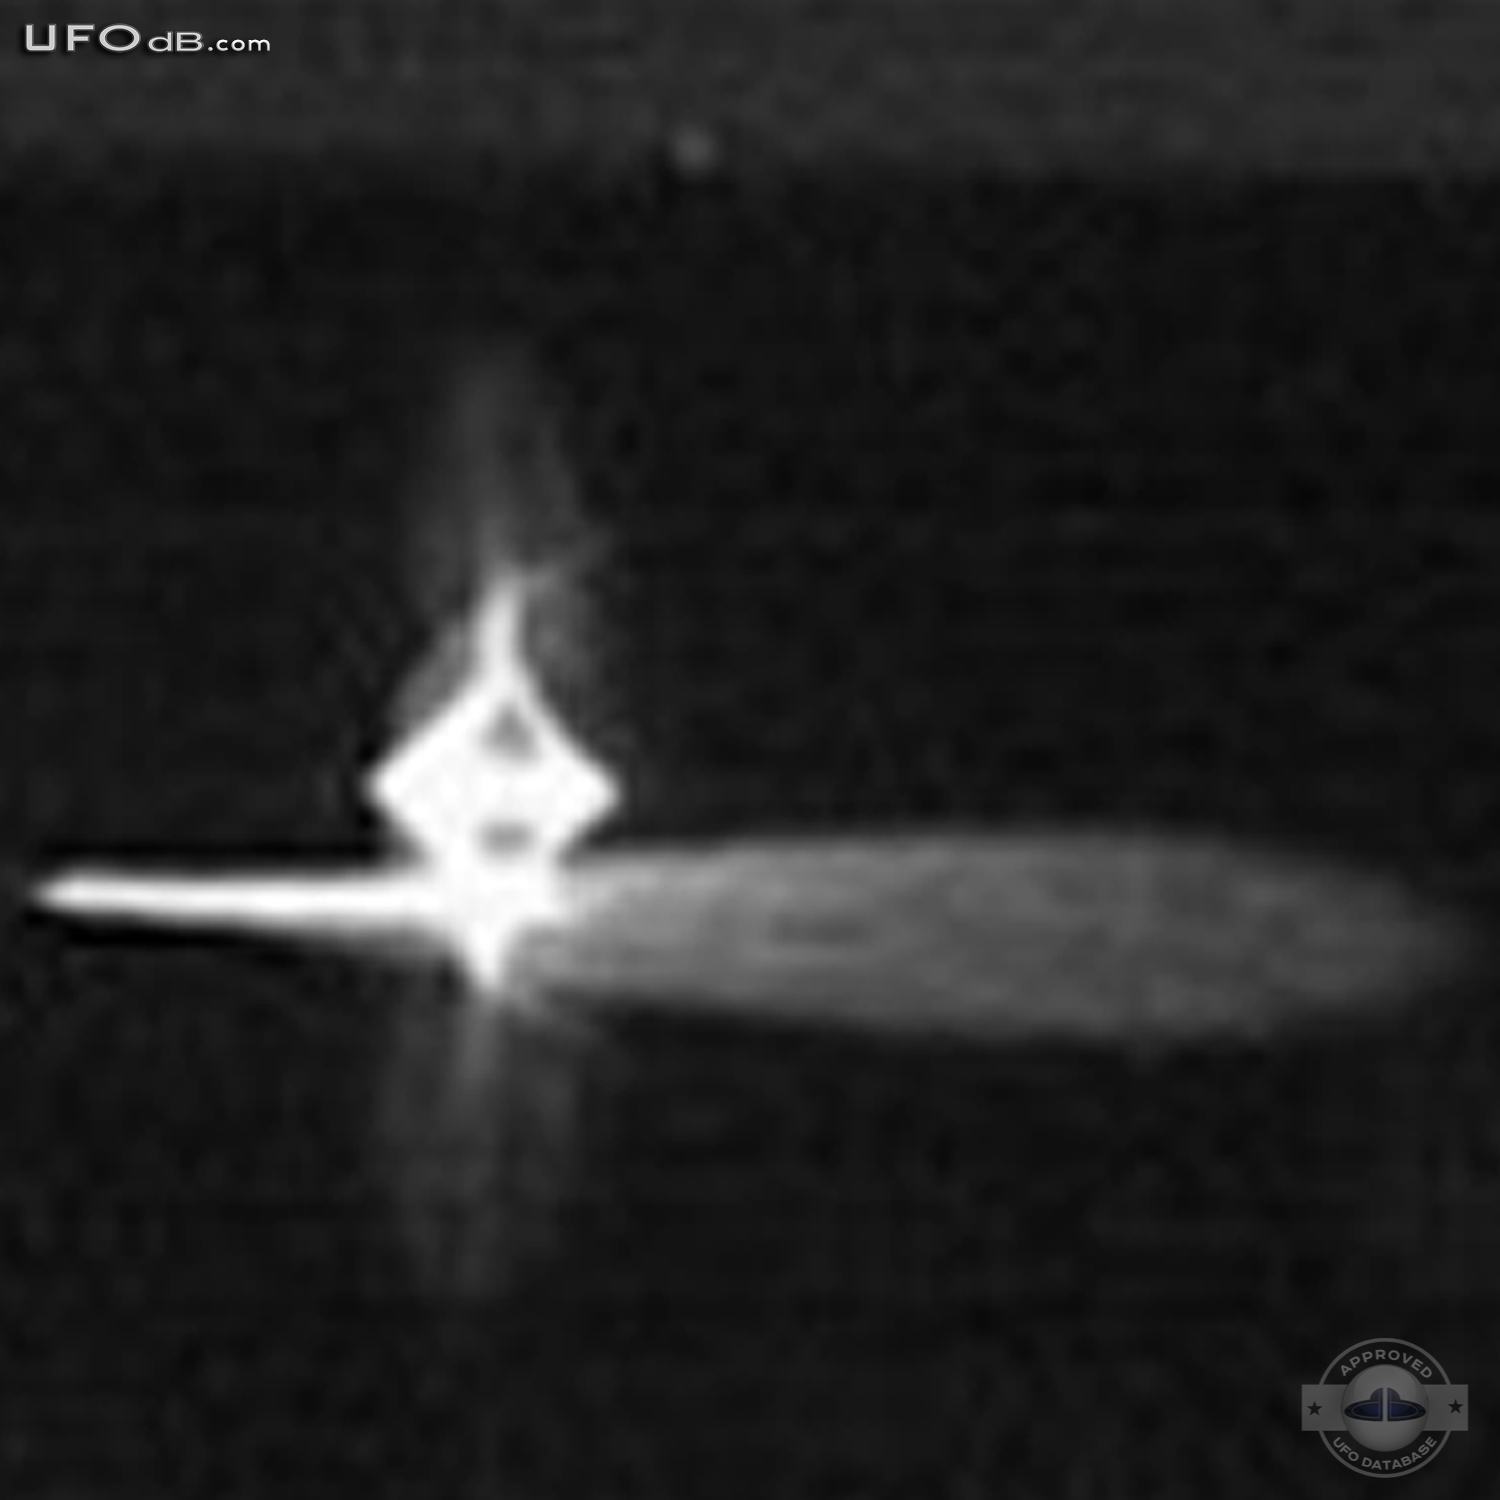 Santa Cesarea Terme floating UFO caught on Cam | Italy | May 17 2011 UFO Picture #295-5